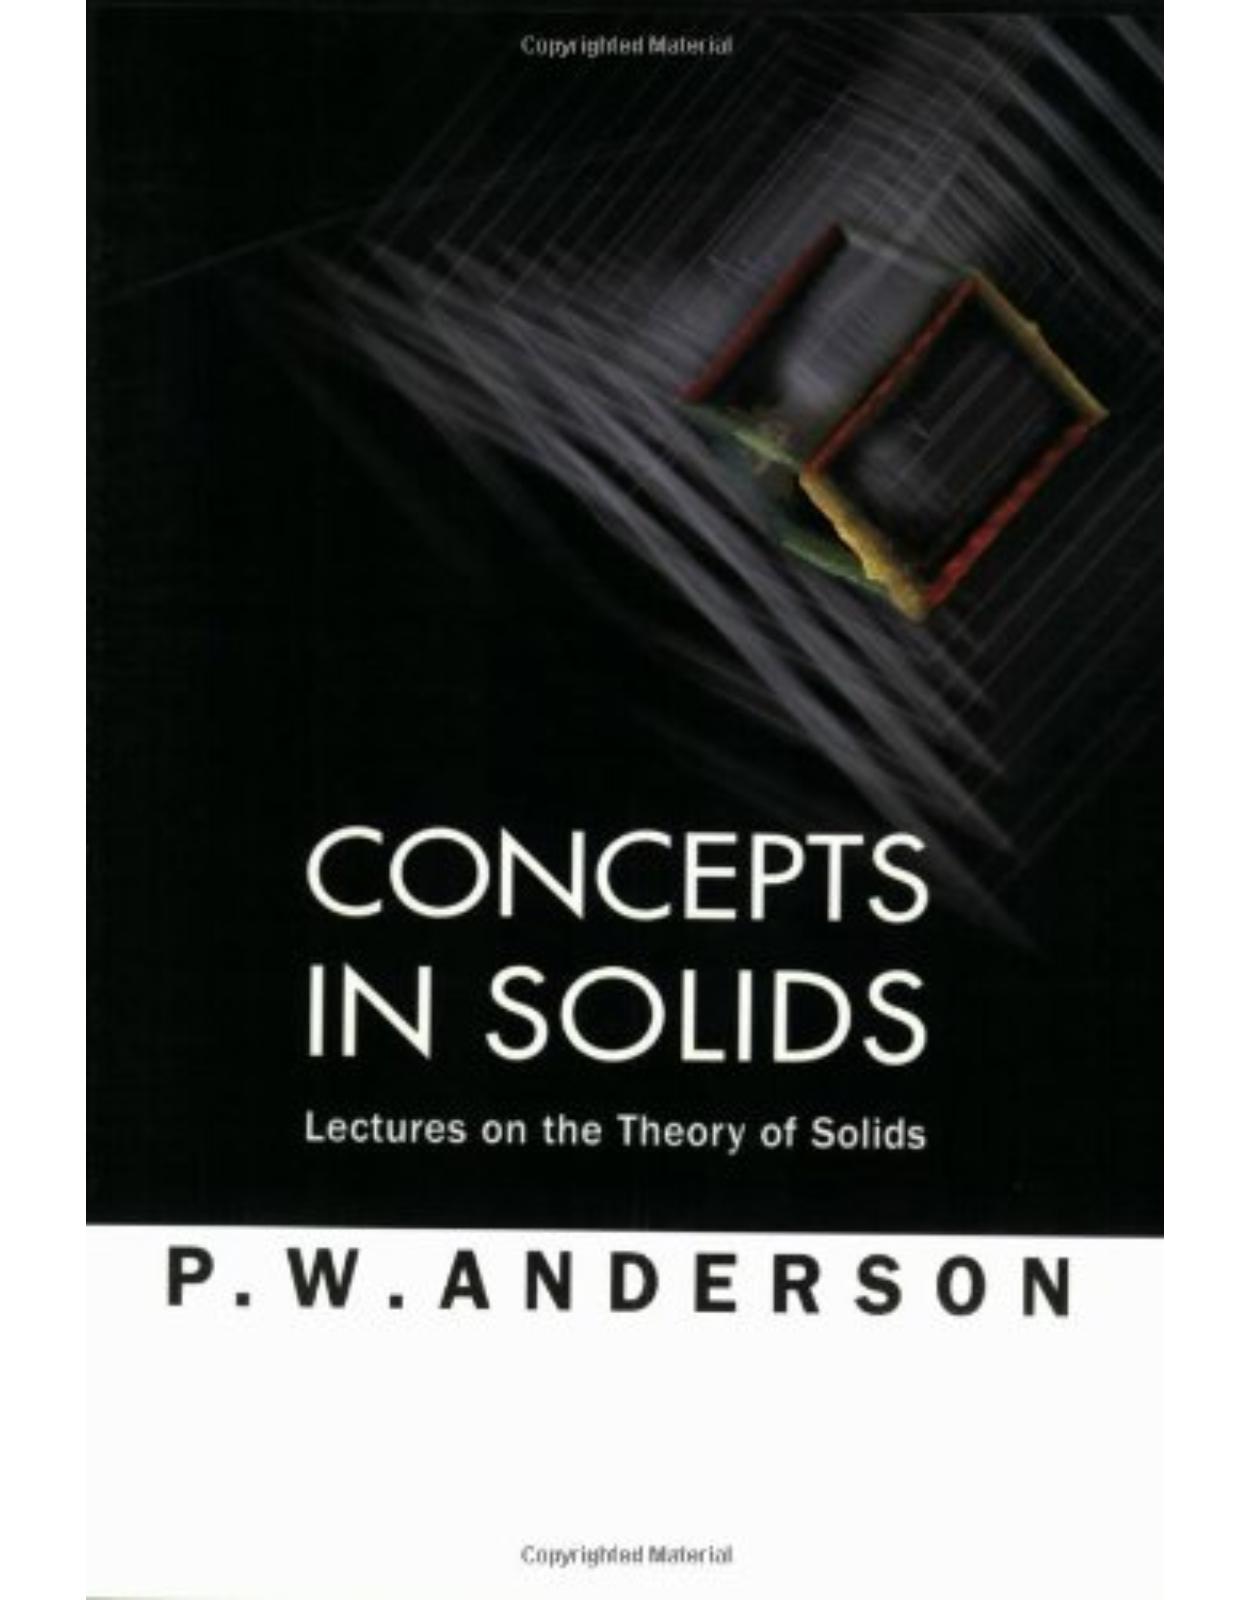 Concepts in Solids: Lectures on the Theory of Solids (World Scientific Lecture Notes in Physics)